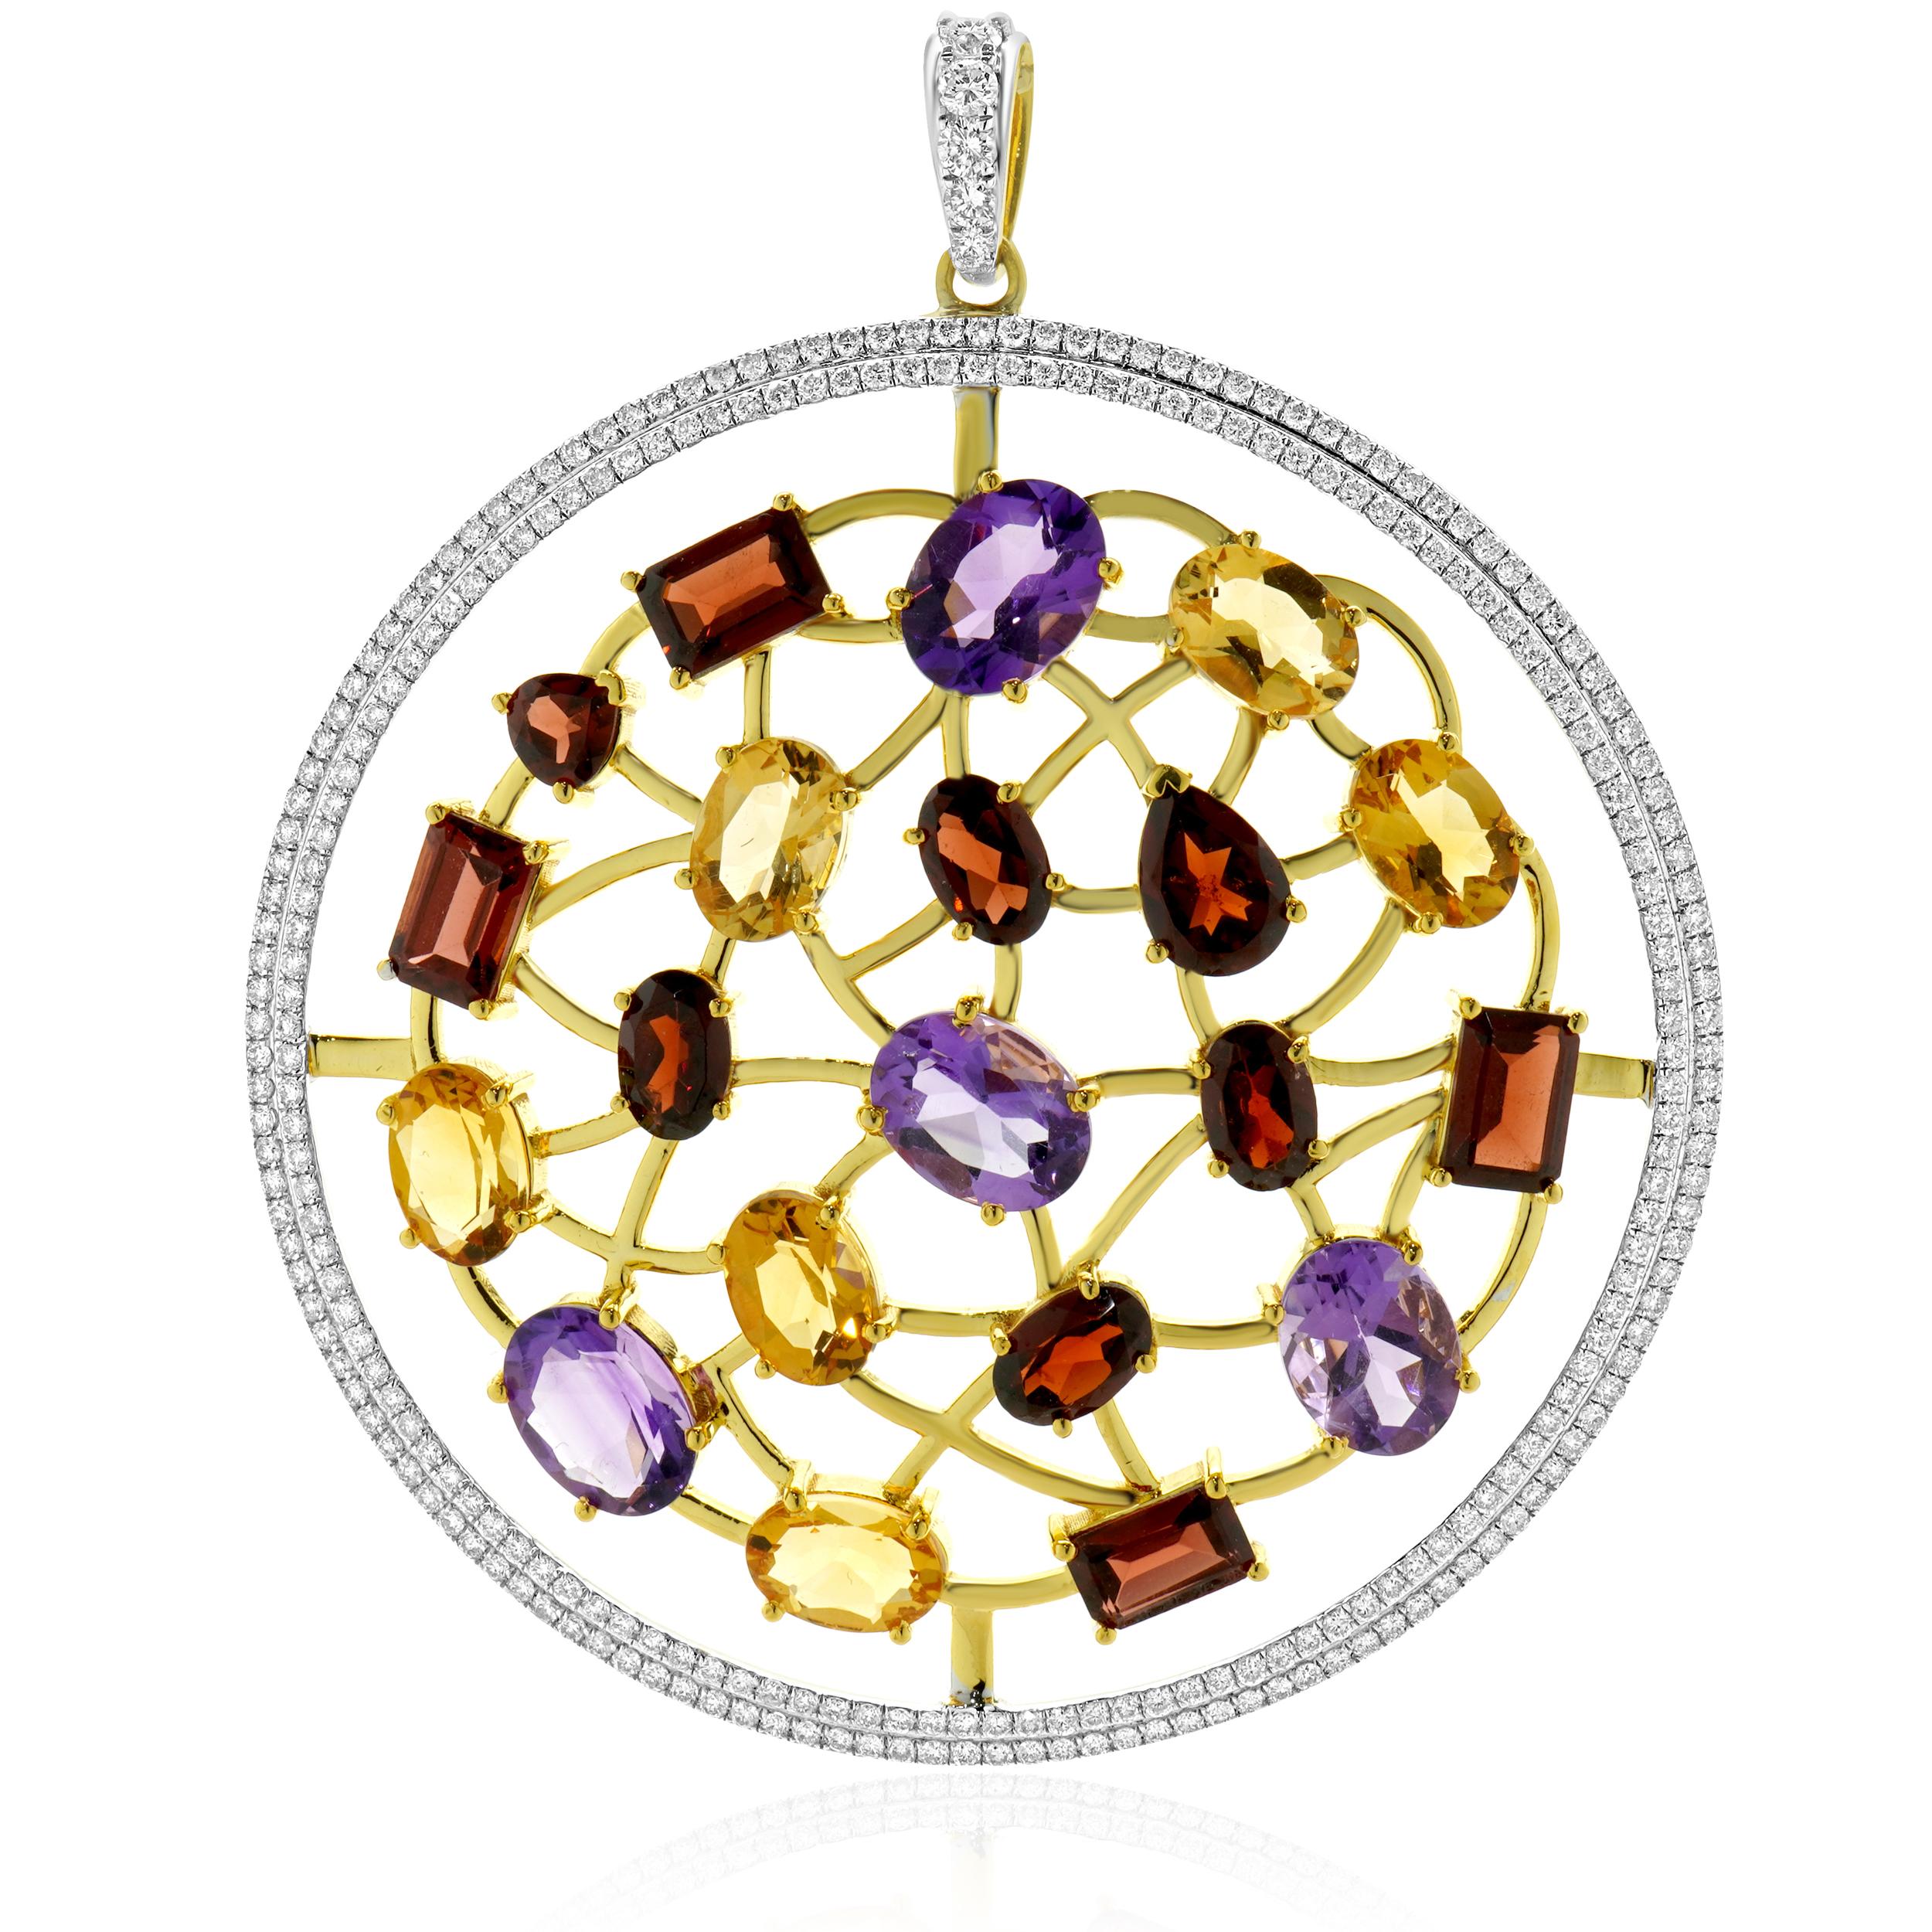 Designer: custom
Material: 14K Two tone gold
Diamond:  round brilliant cut = 1.51cttw
Color: G
Clarity: VS-SI1
Multi-Gemstone: 20 marquise cut = 9.10cttw
Dimensions: necklace measures 16-inches in length
Weight: 15.51 grams
